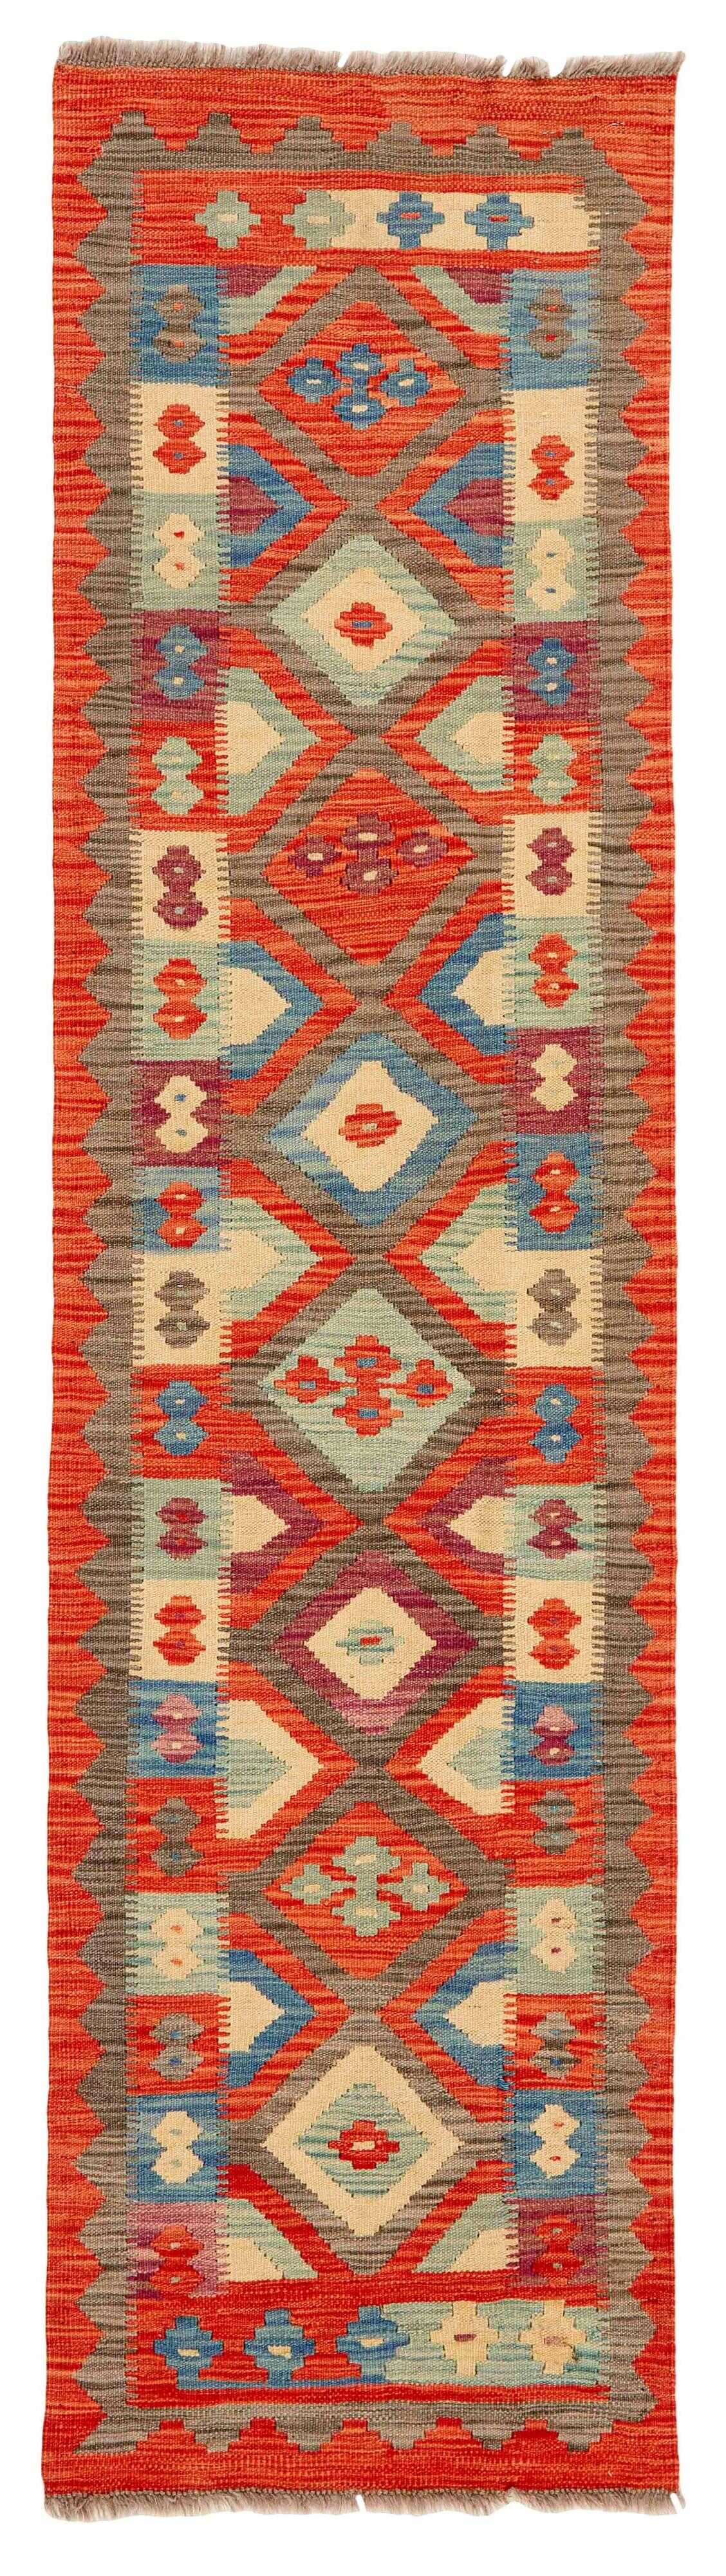 Authentic oriental runner with traditional multicolour geometric pattern in blue, yellow, orange and red